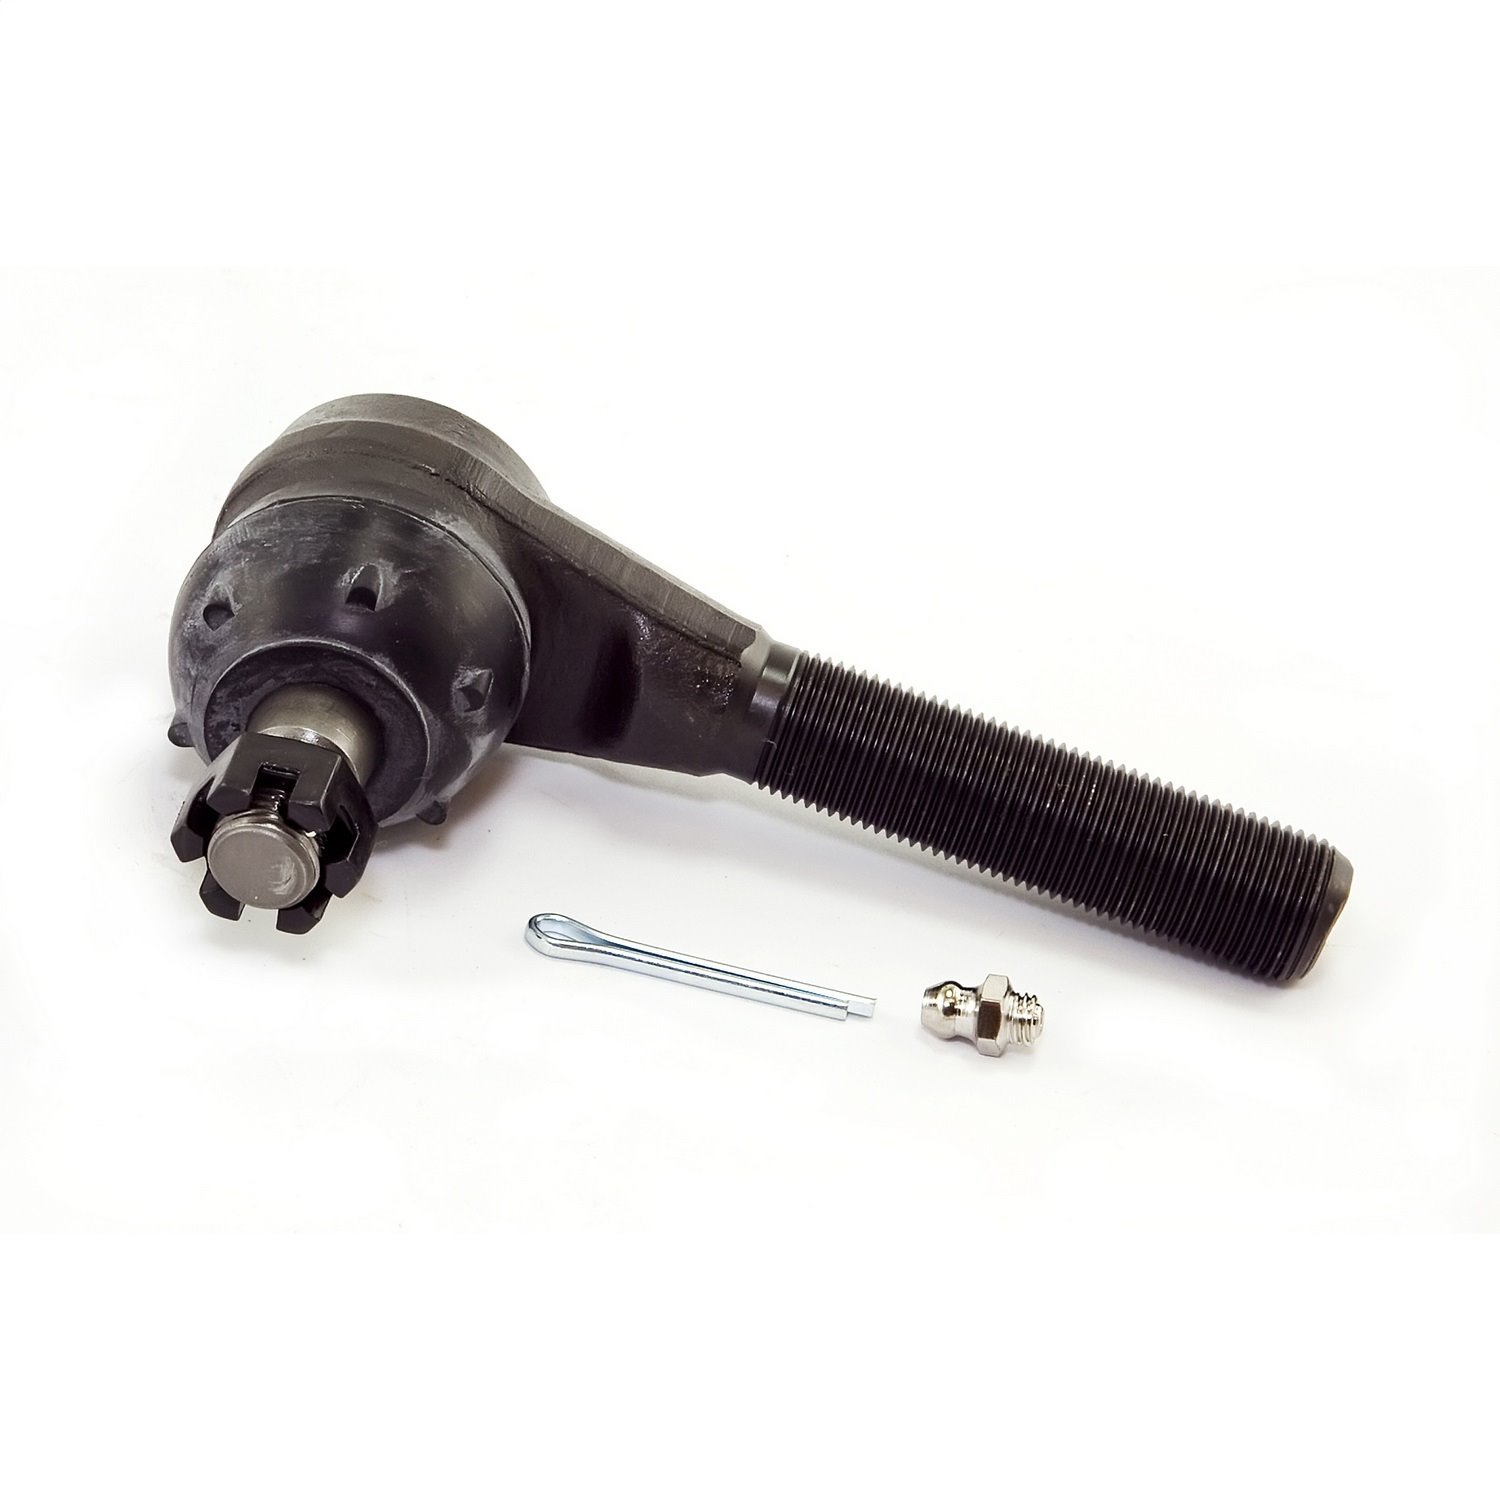 Stock replacement tie rod end from Omix-ADA, Fits 84-90 Jeep Cherokee XJ and 87-90 Wrangler YJRight hand thread.